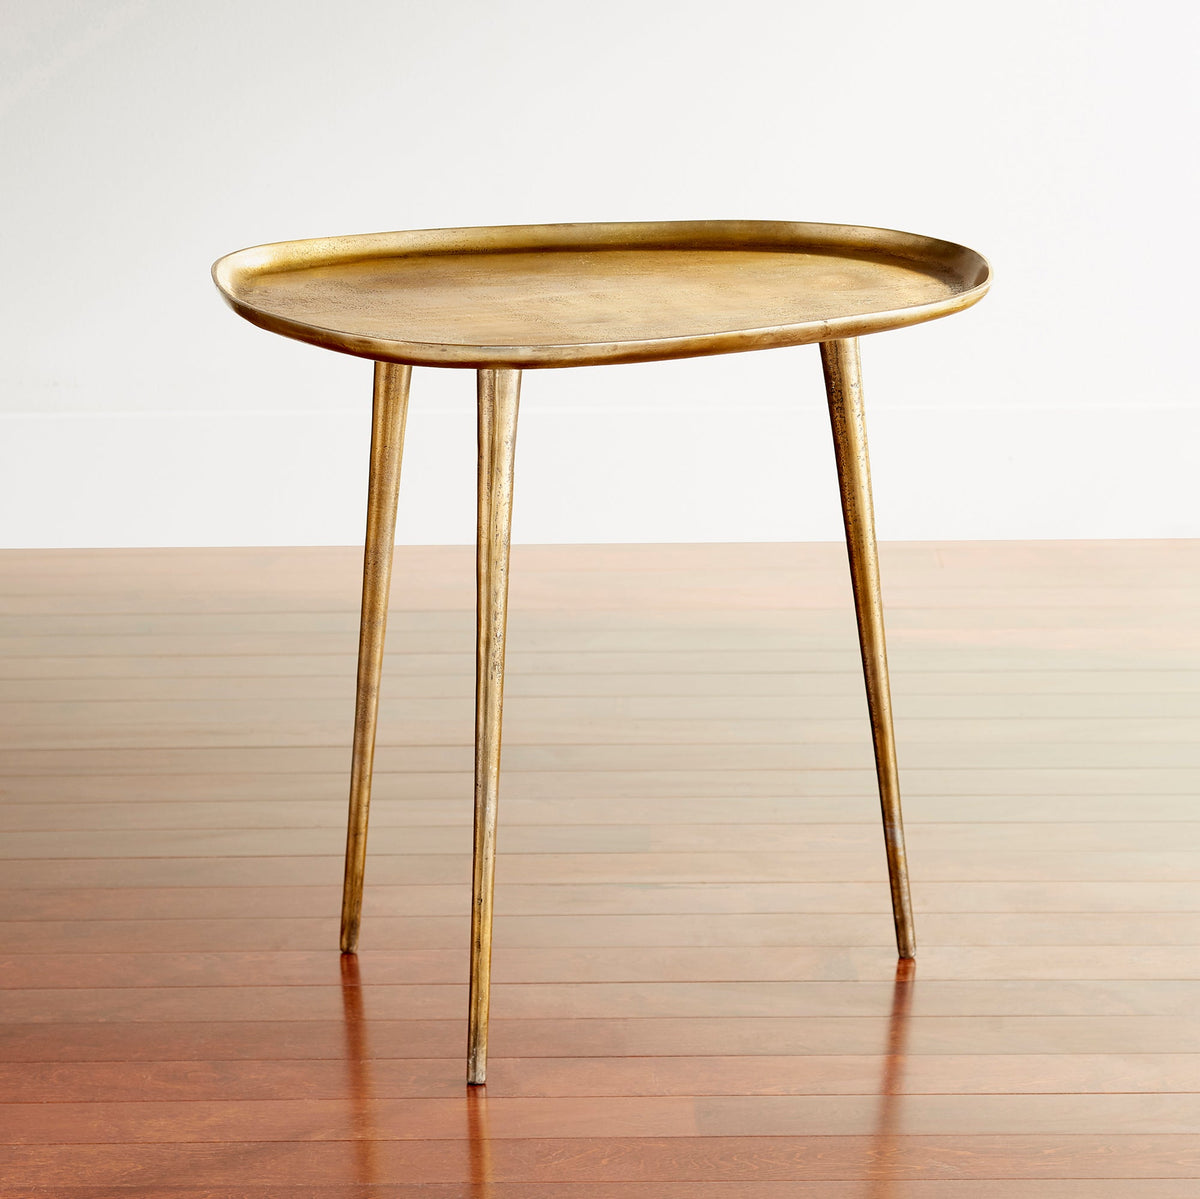 Bexley Side Table -LG by Cyan